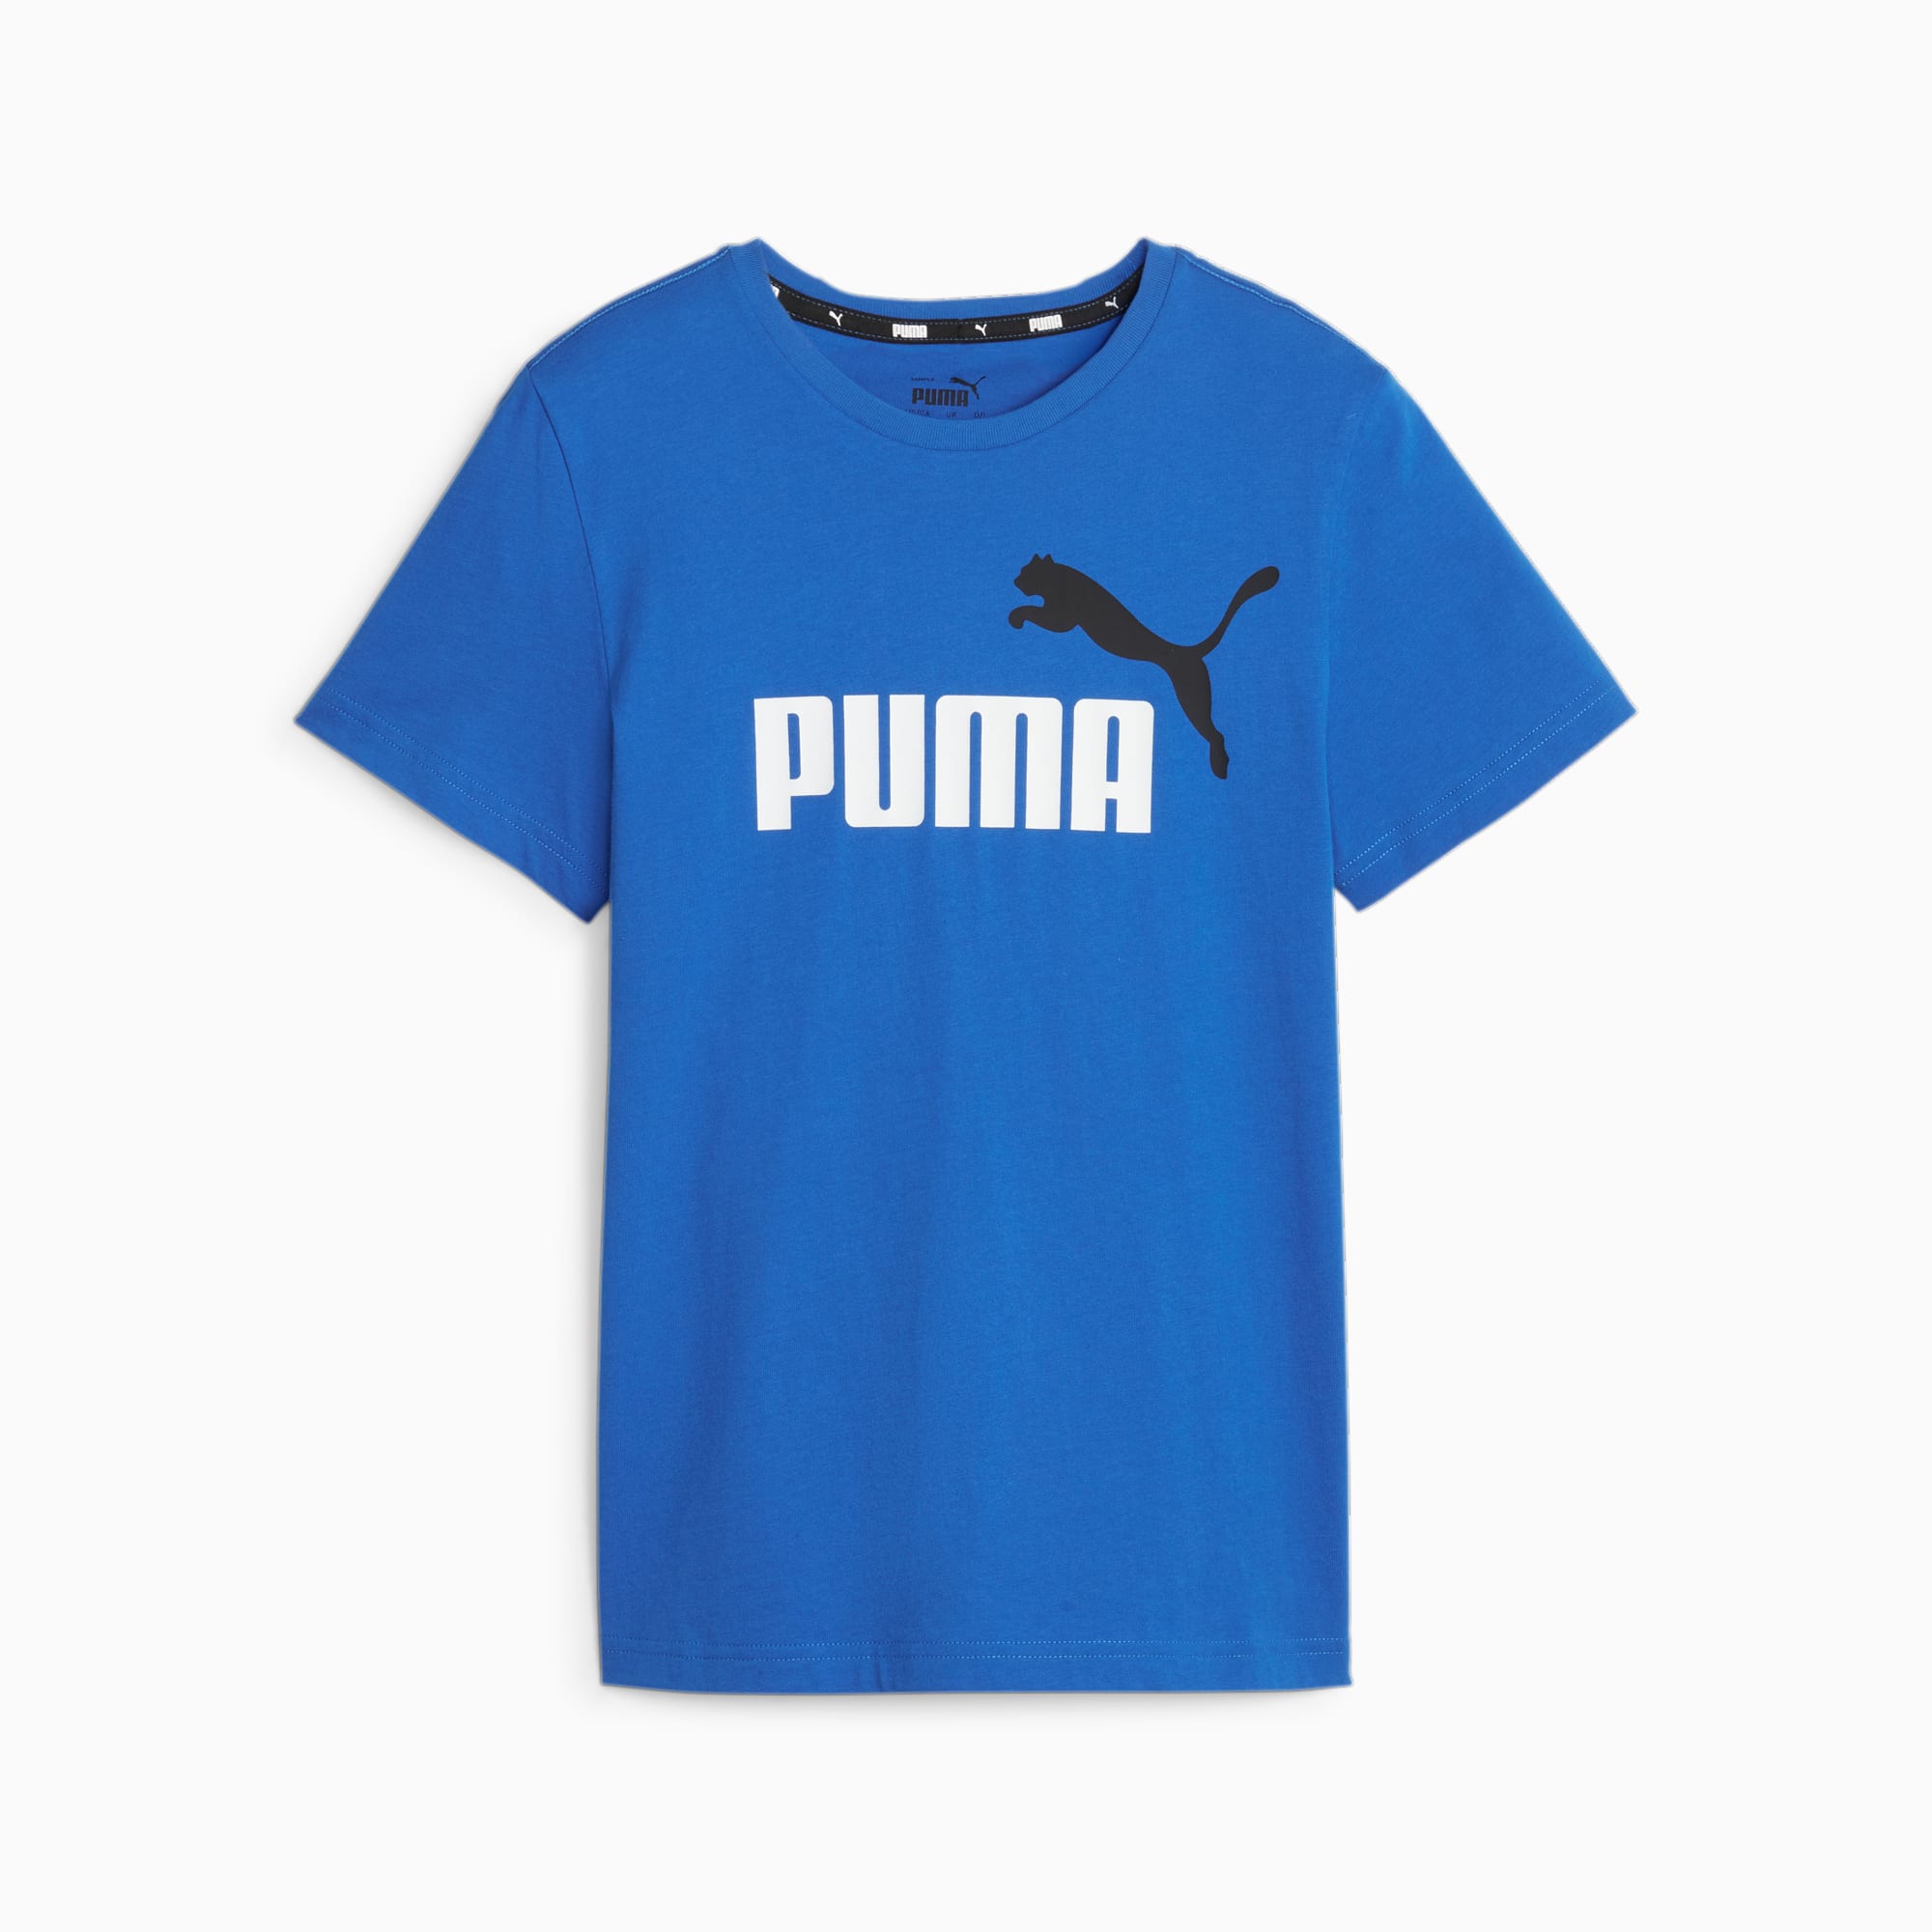 PUMA Essentials+ Two-Tone Logo Youth T-Shirt, Racing Blue, Size 92, Clothing